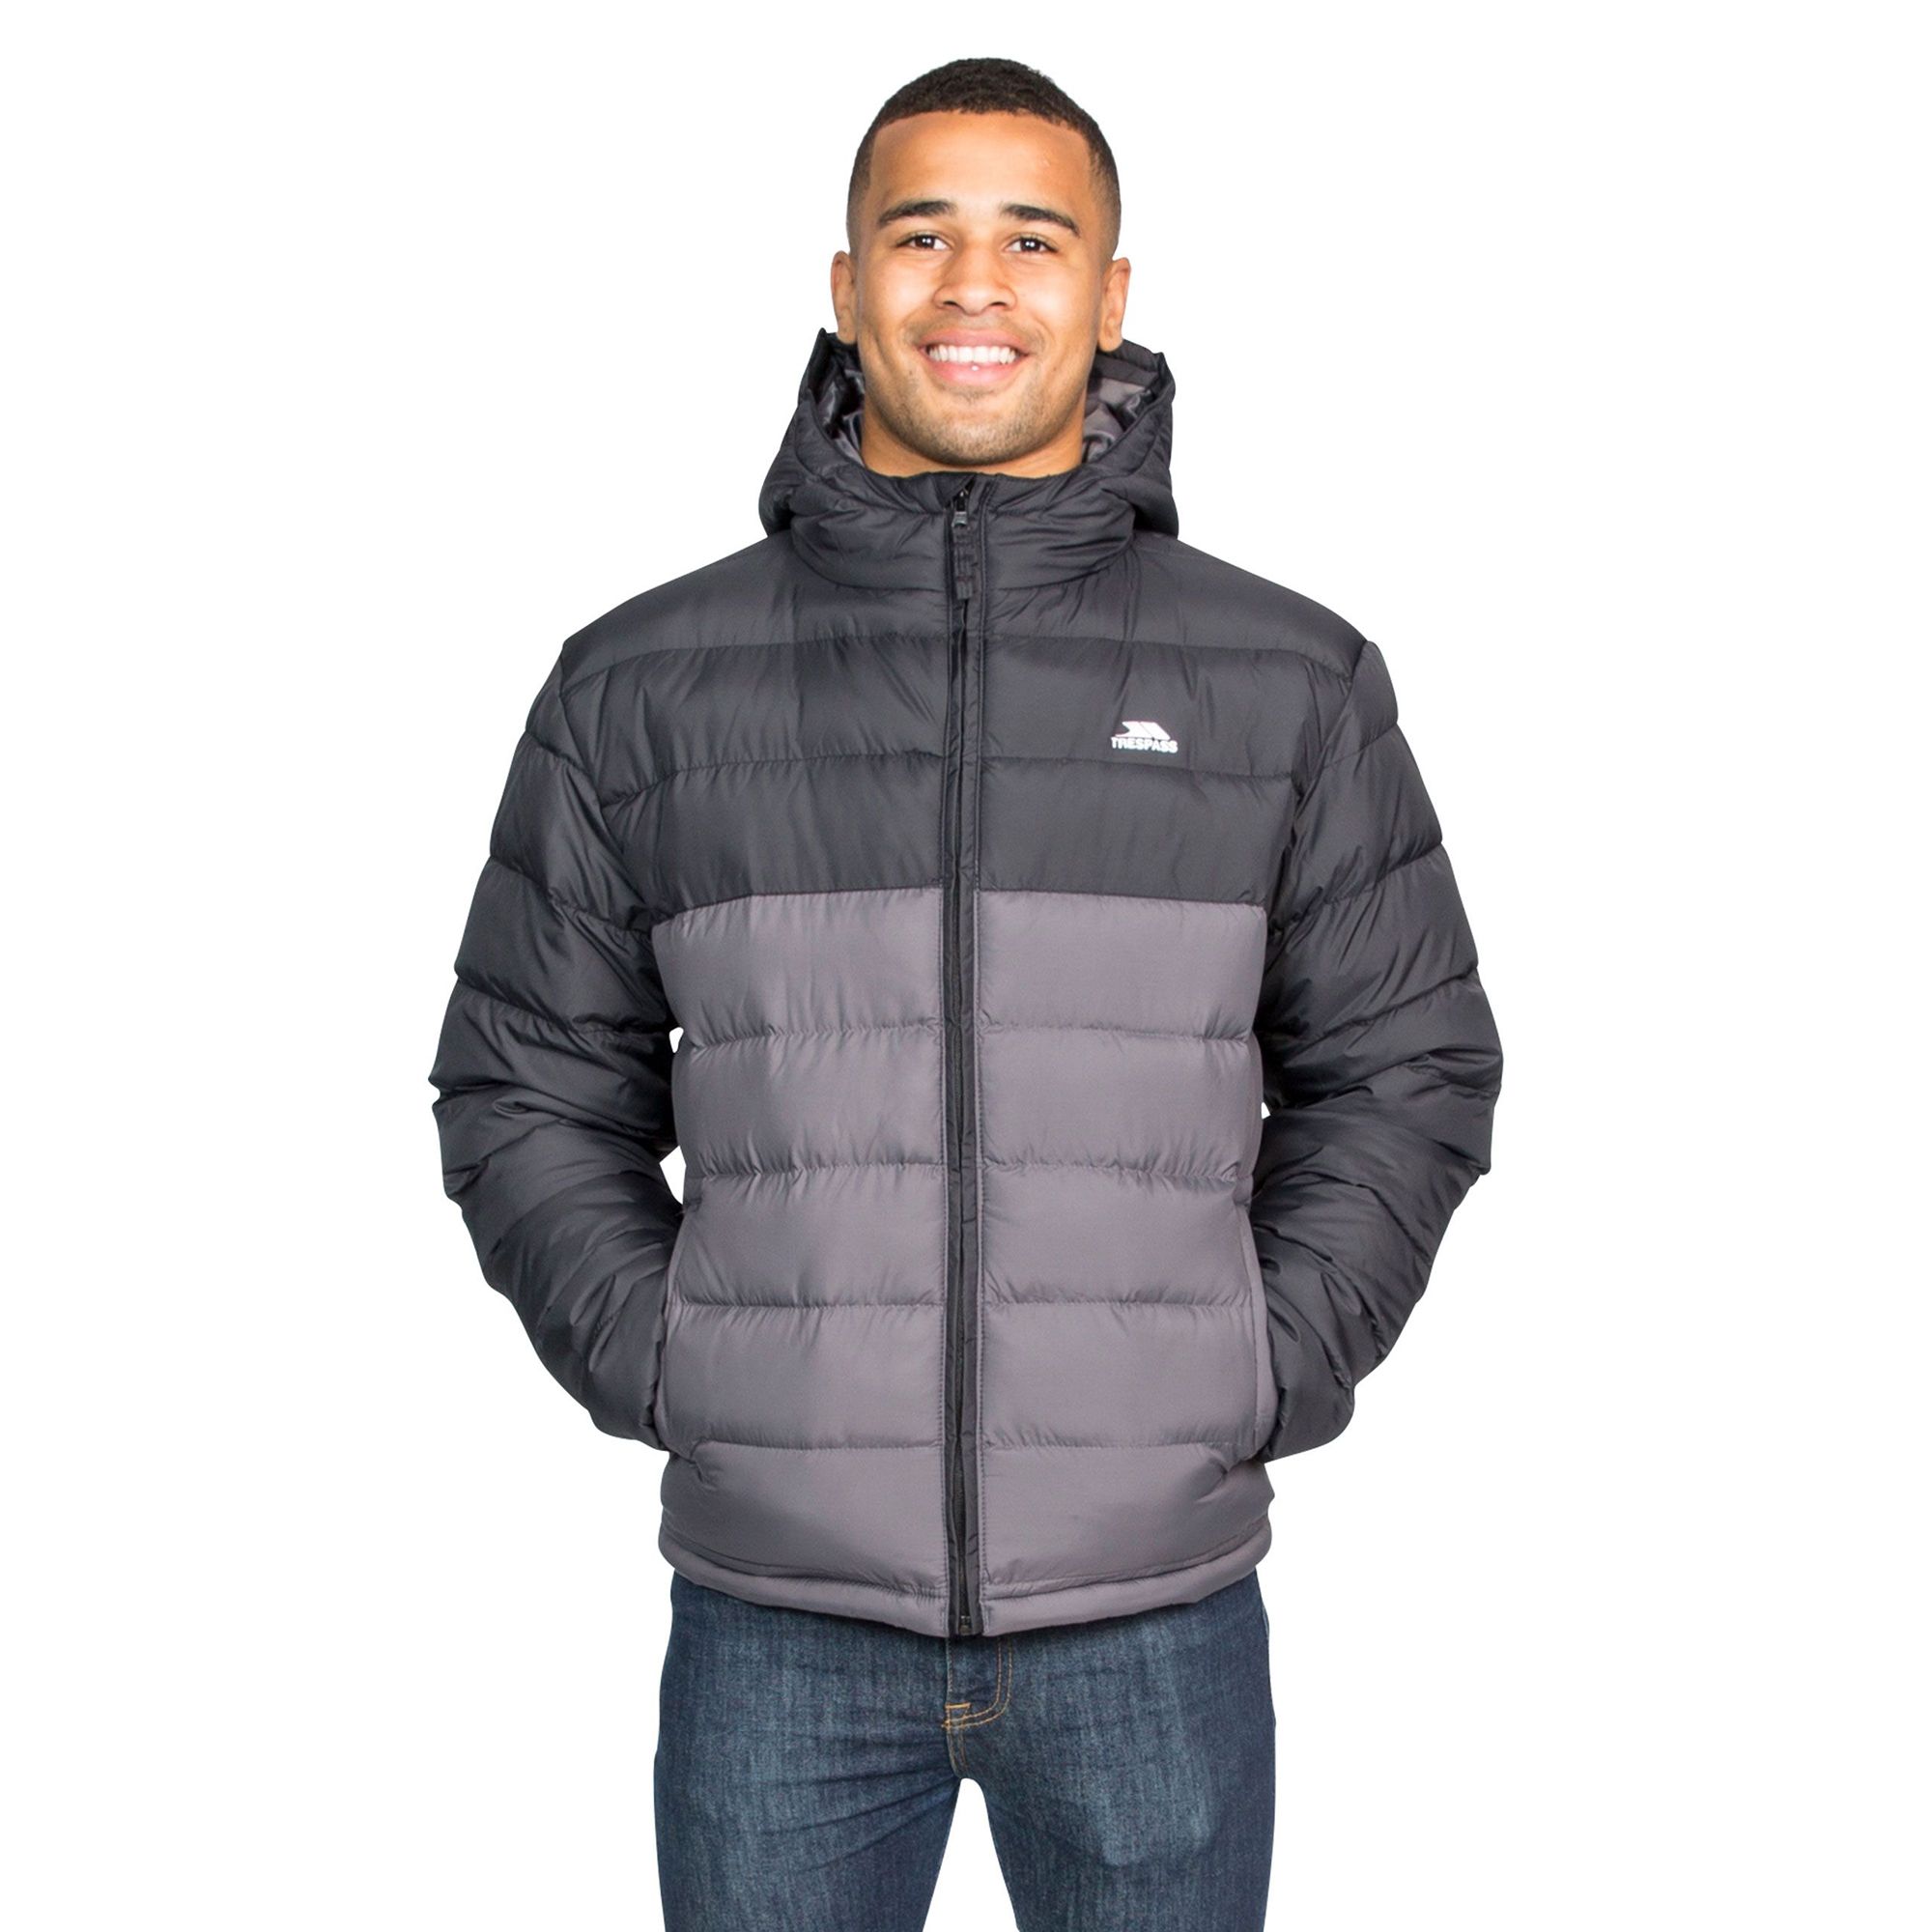 Shell: 100% Polyester, Lining: 100% Polyester, Filling: 100% Polyester. Water-resistant. Wind-resistant. Padded. Quilted jacket grown on hood. 2 pockets. Contrast zip. Elasticated rounded dip at back.